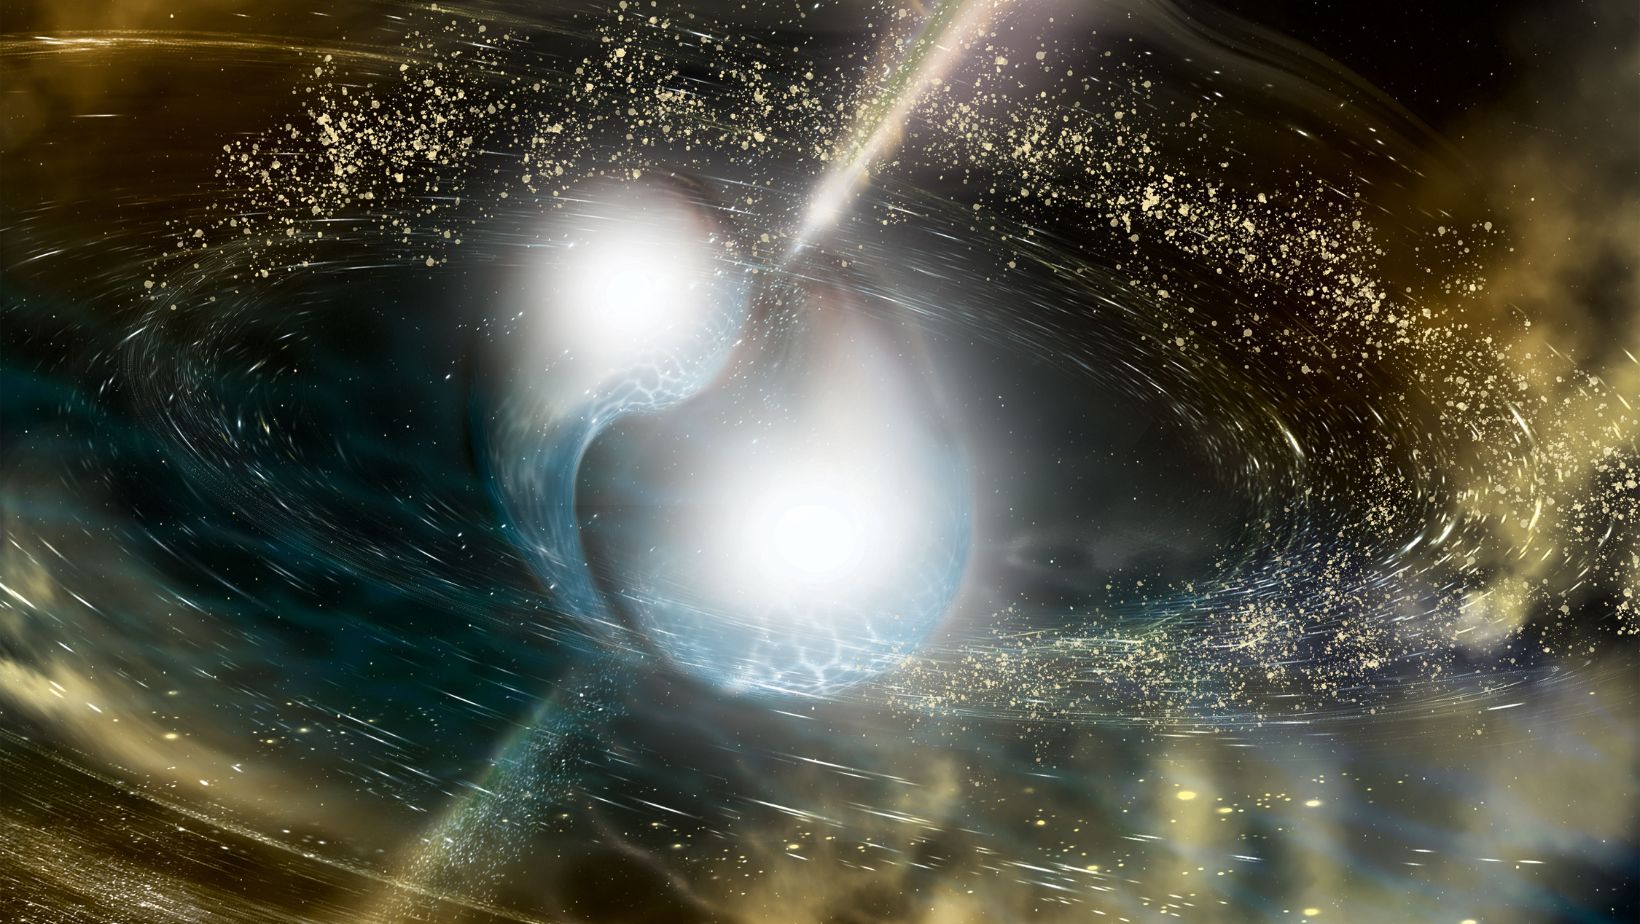 role of neutron stars in the universe